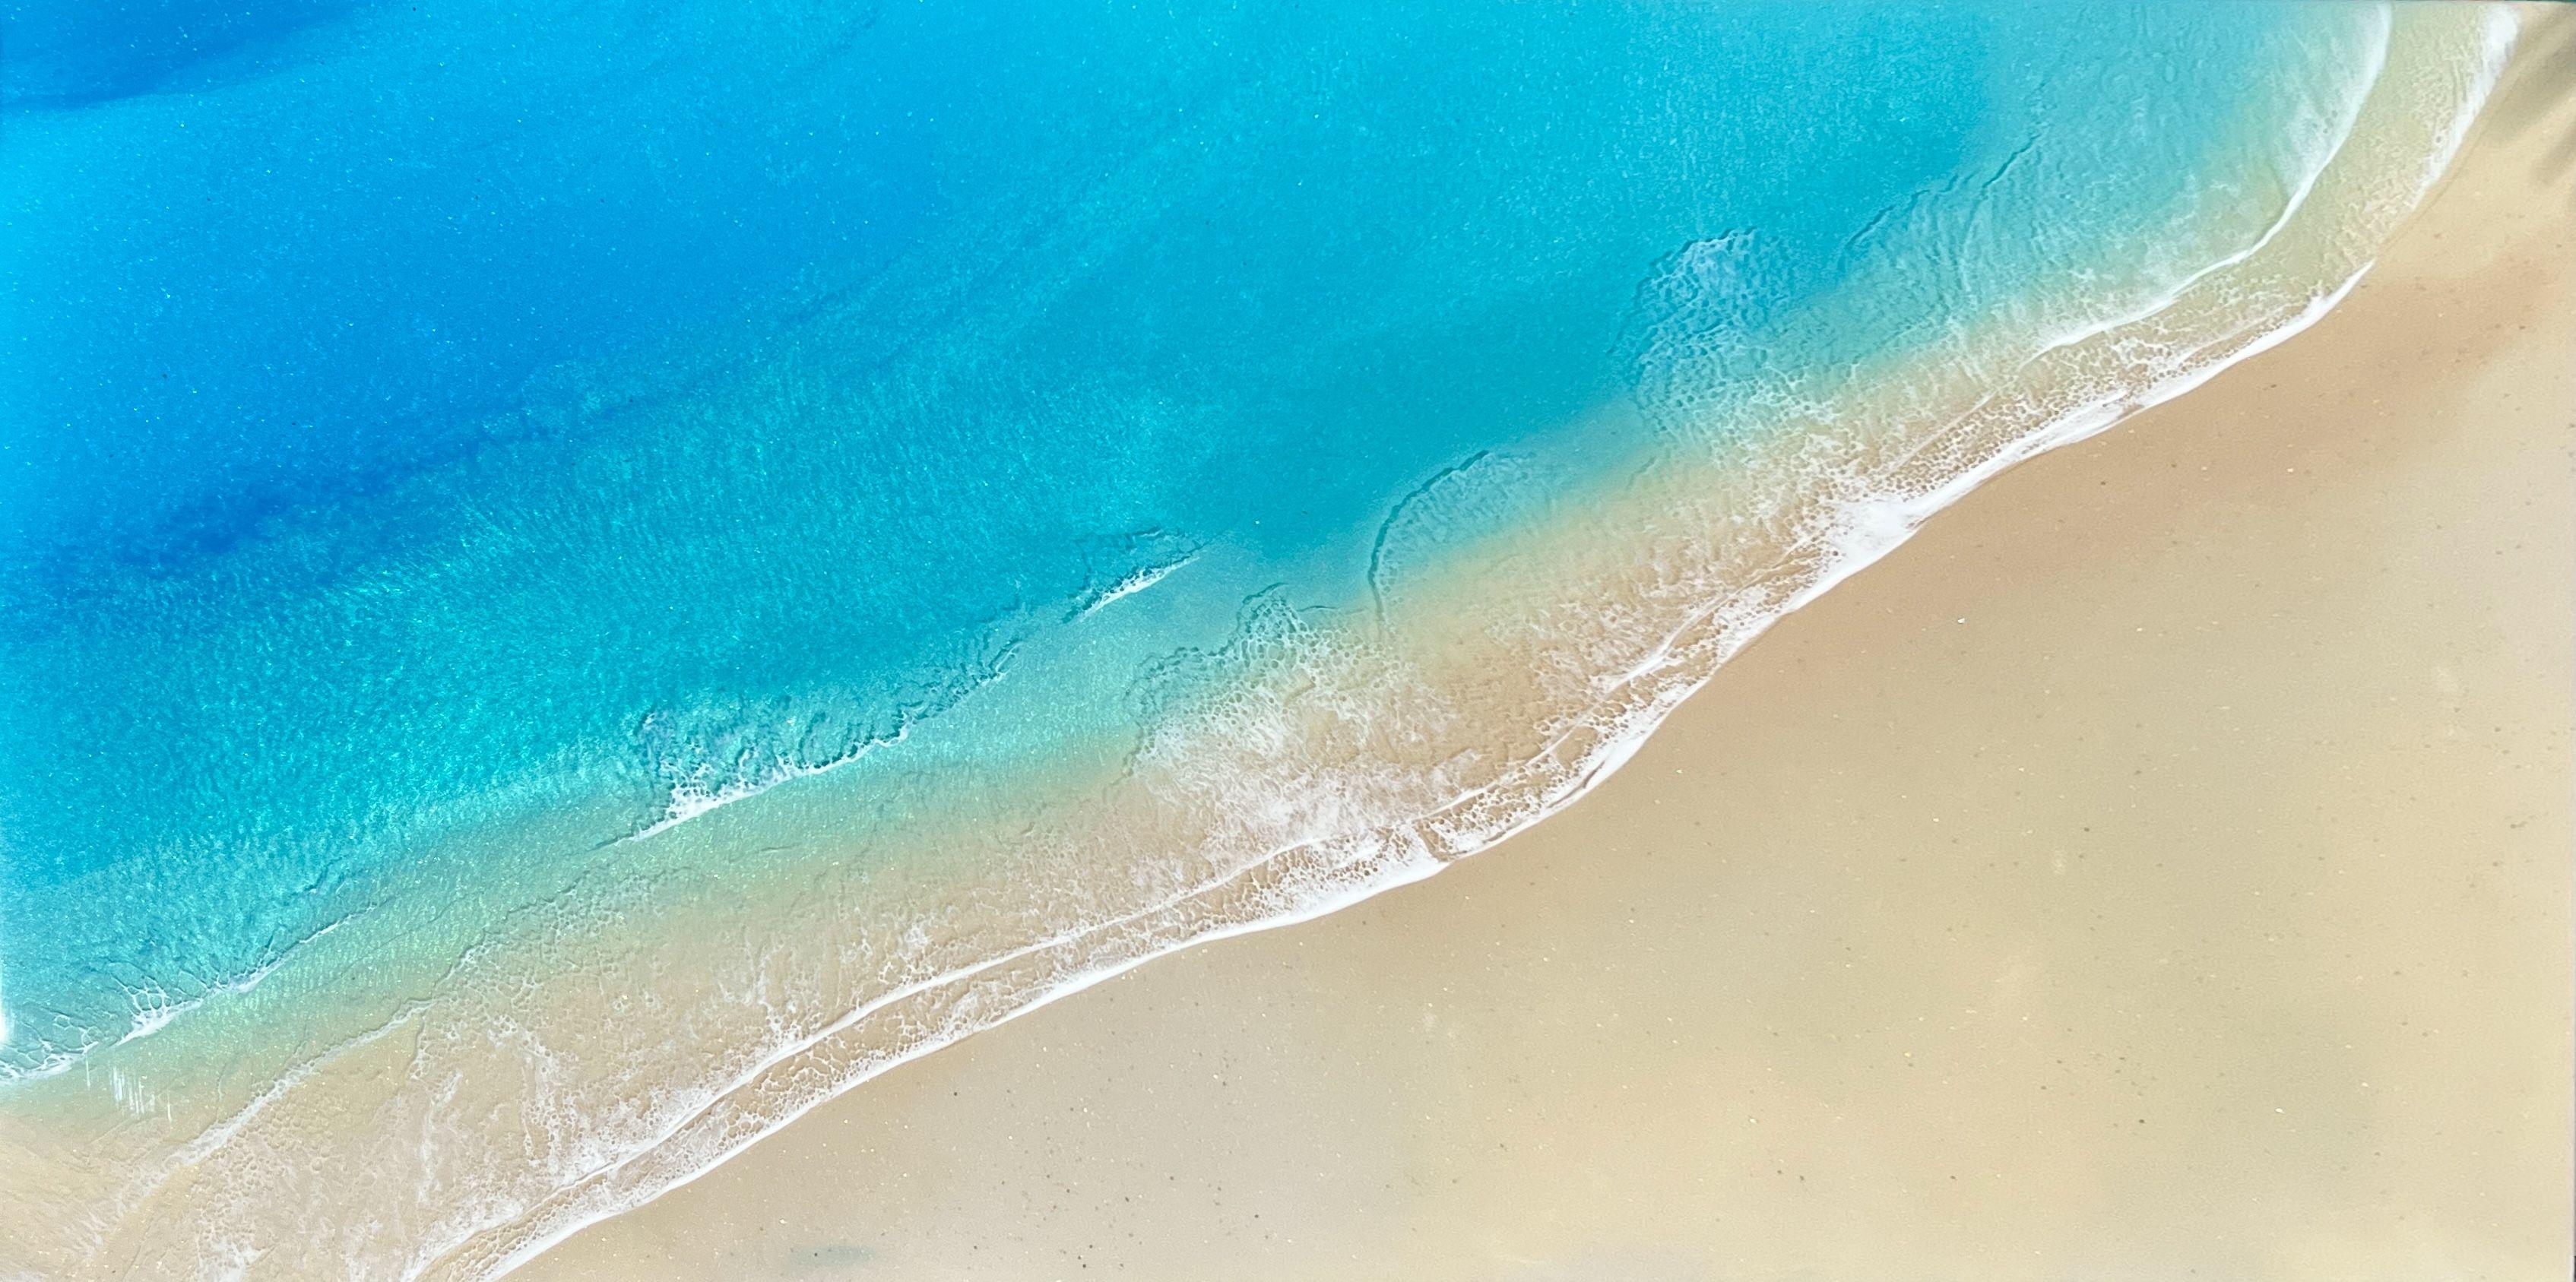 White Sand Beach Aerial perspective Ocean Painting with different shades of blue, turquoise, teal, aqua, beige and white inspired by The Bahamas and Turks And Caicos Islands  This painting does not need to be framed, the painted image continues over